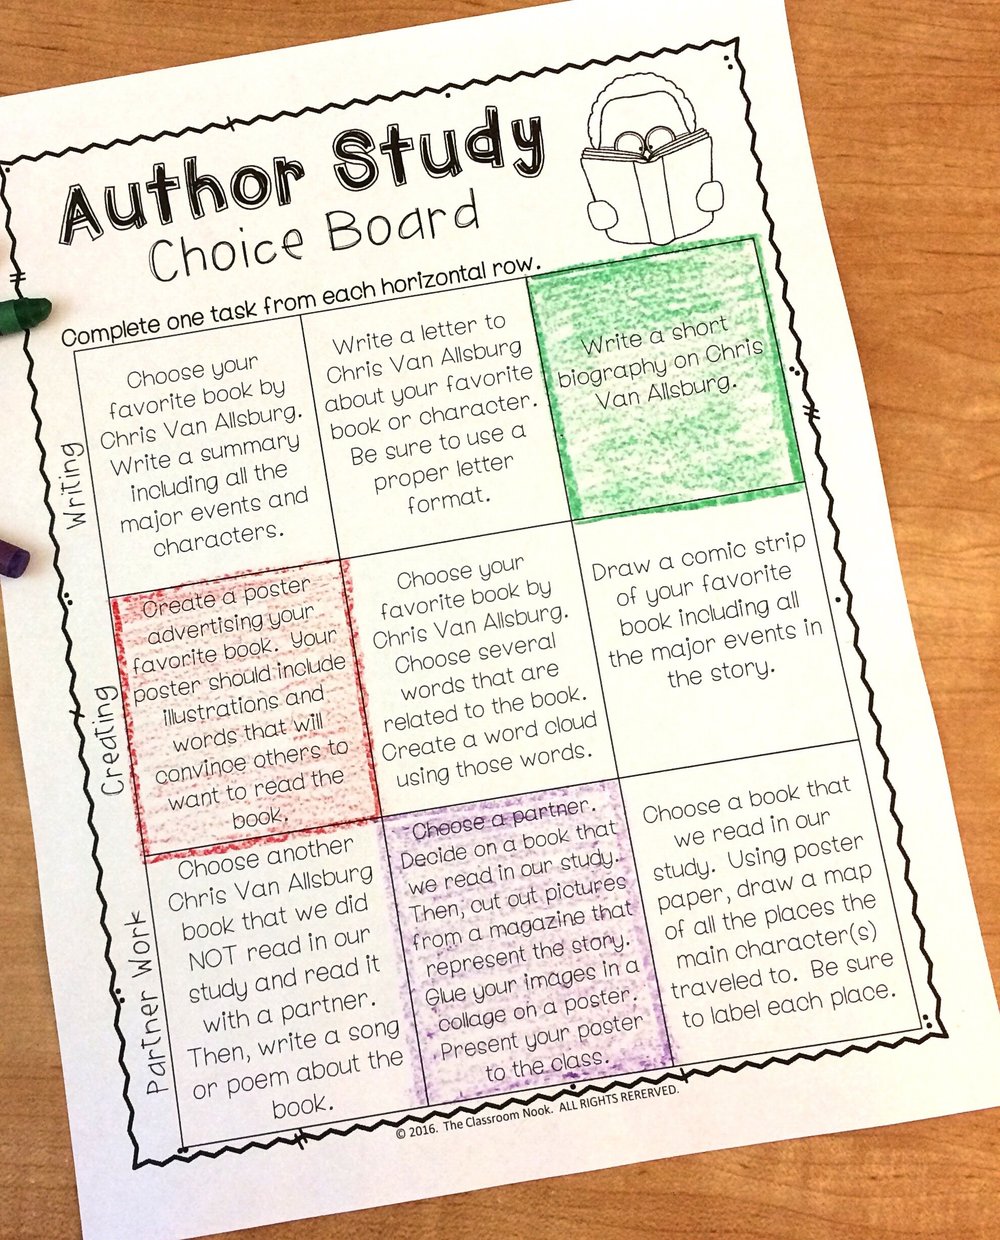 Author Study Series Part 4 Activities For Your Author Study The Classroom Nook